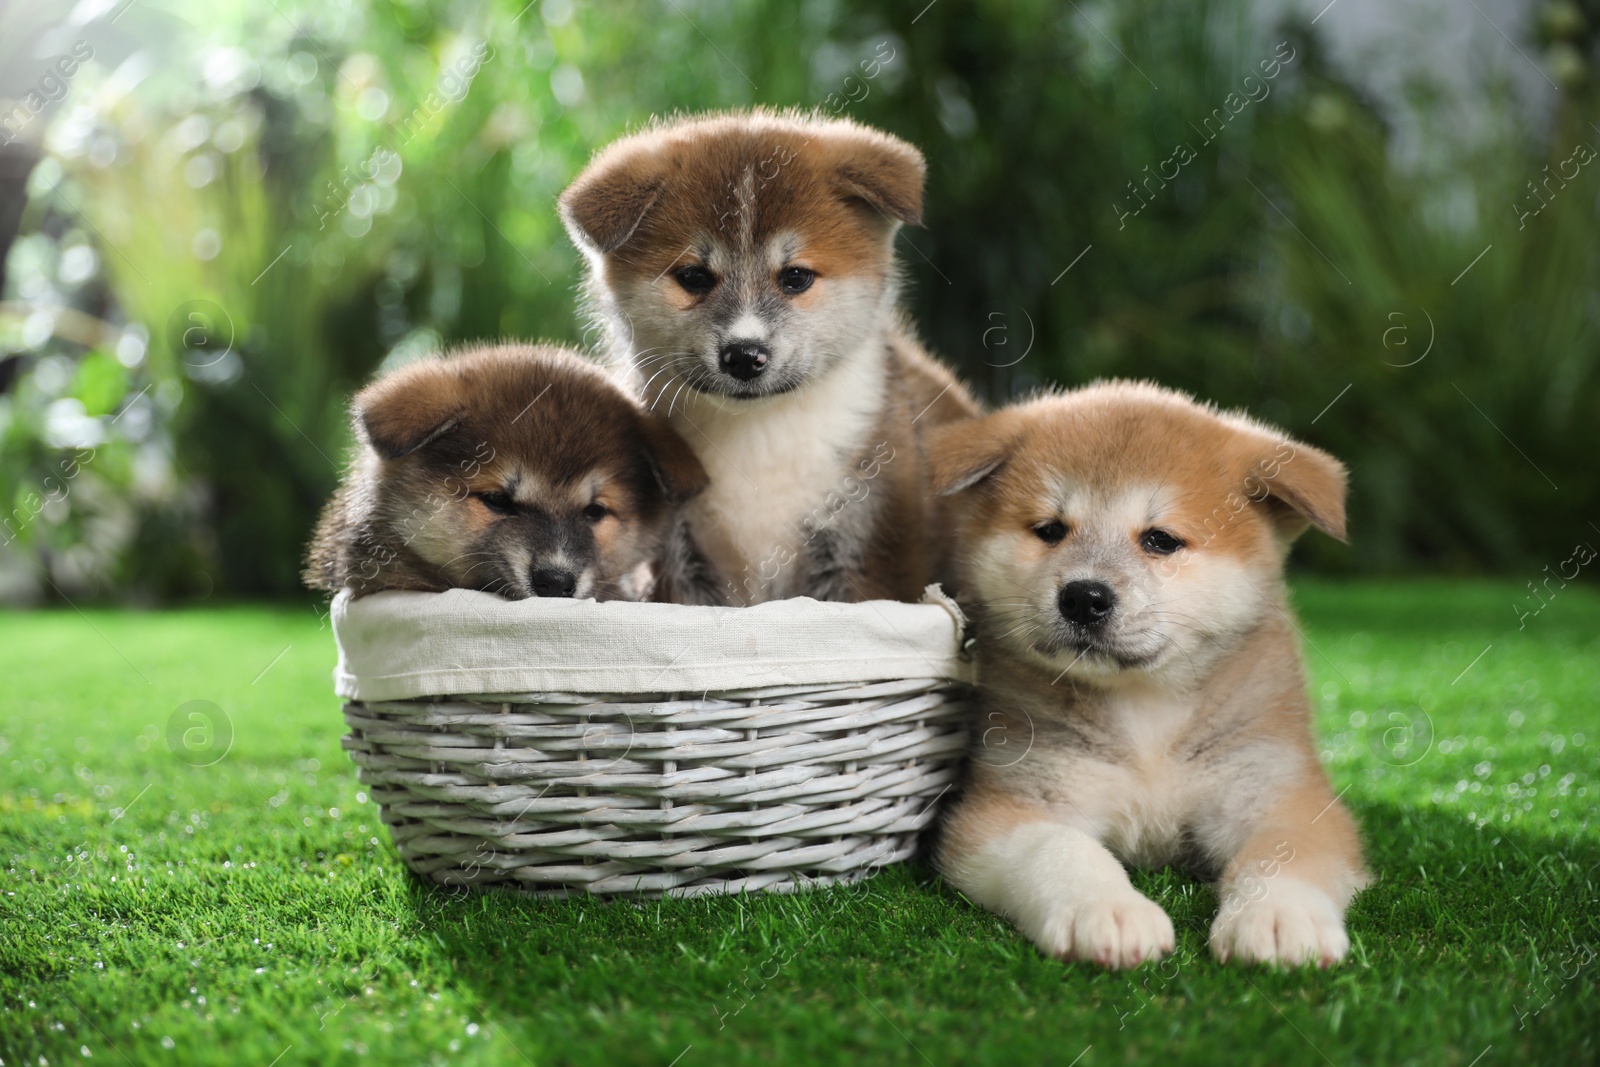 Photo of Cute Akita Inu puppies on green grass outdoors